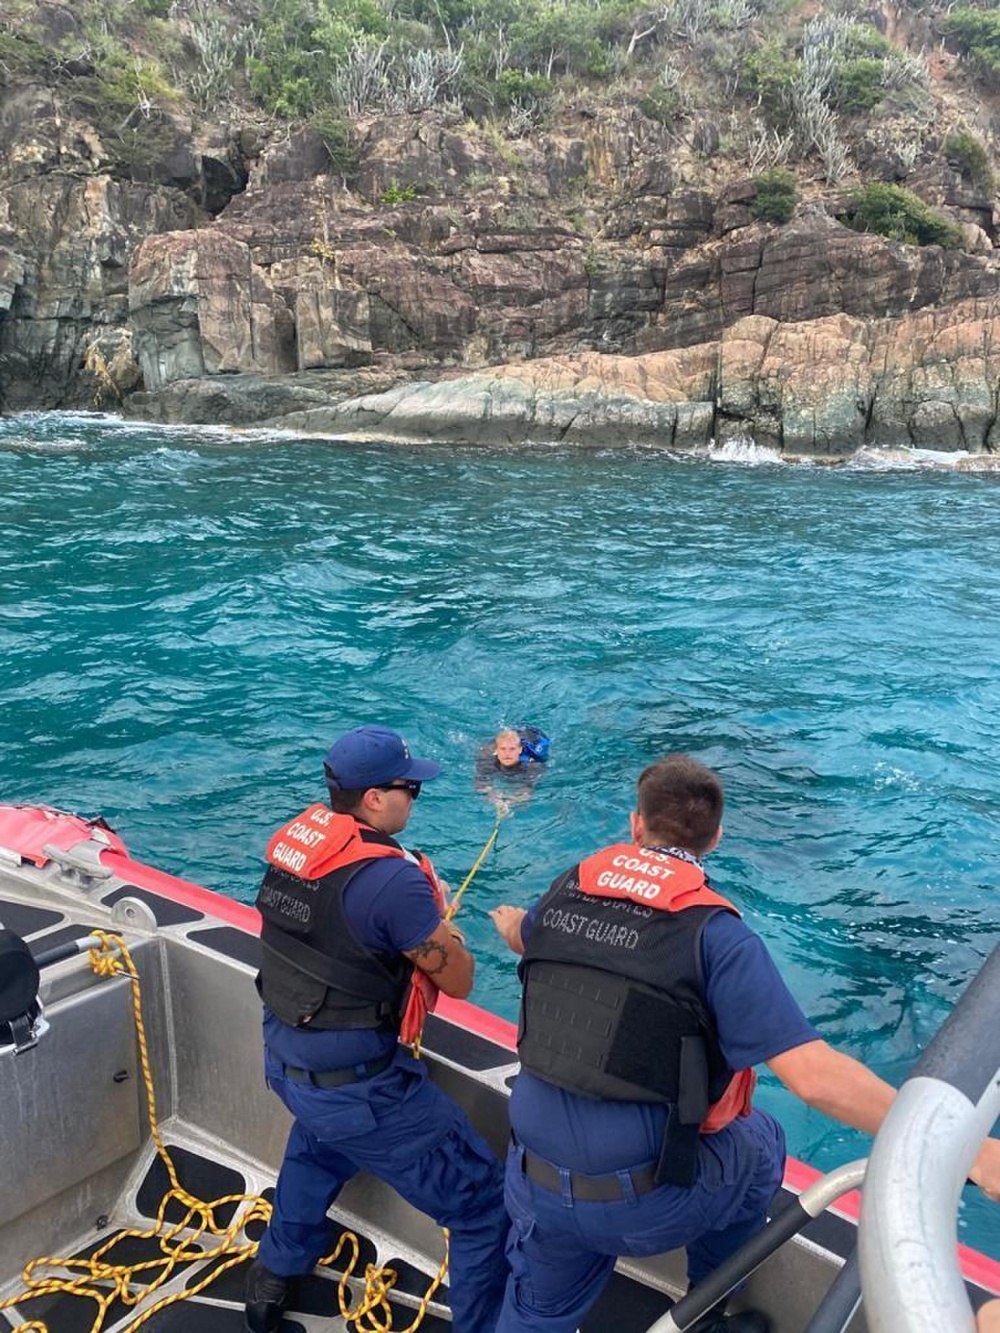 U.S. Coast Guard Rescues Stranded Kayaker In Distress Near Perseverence Bay